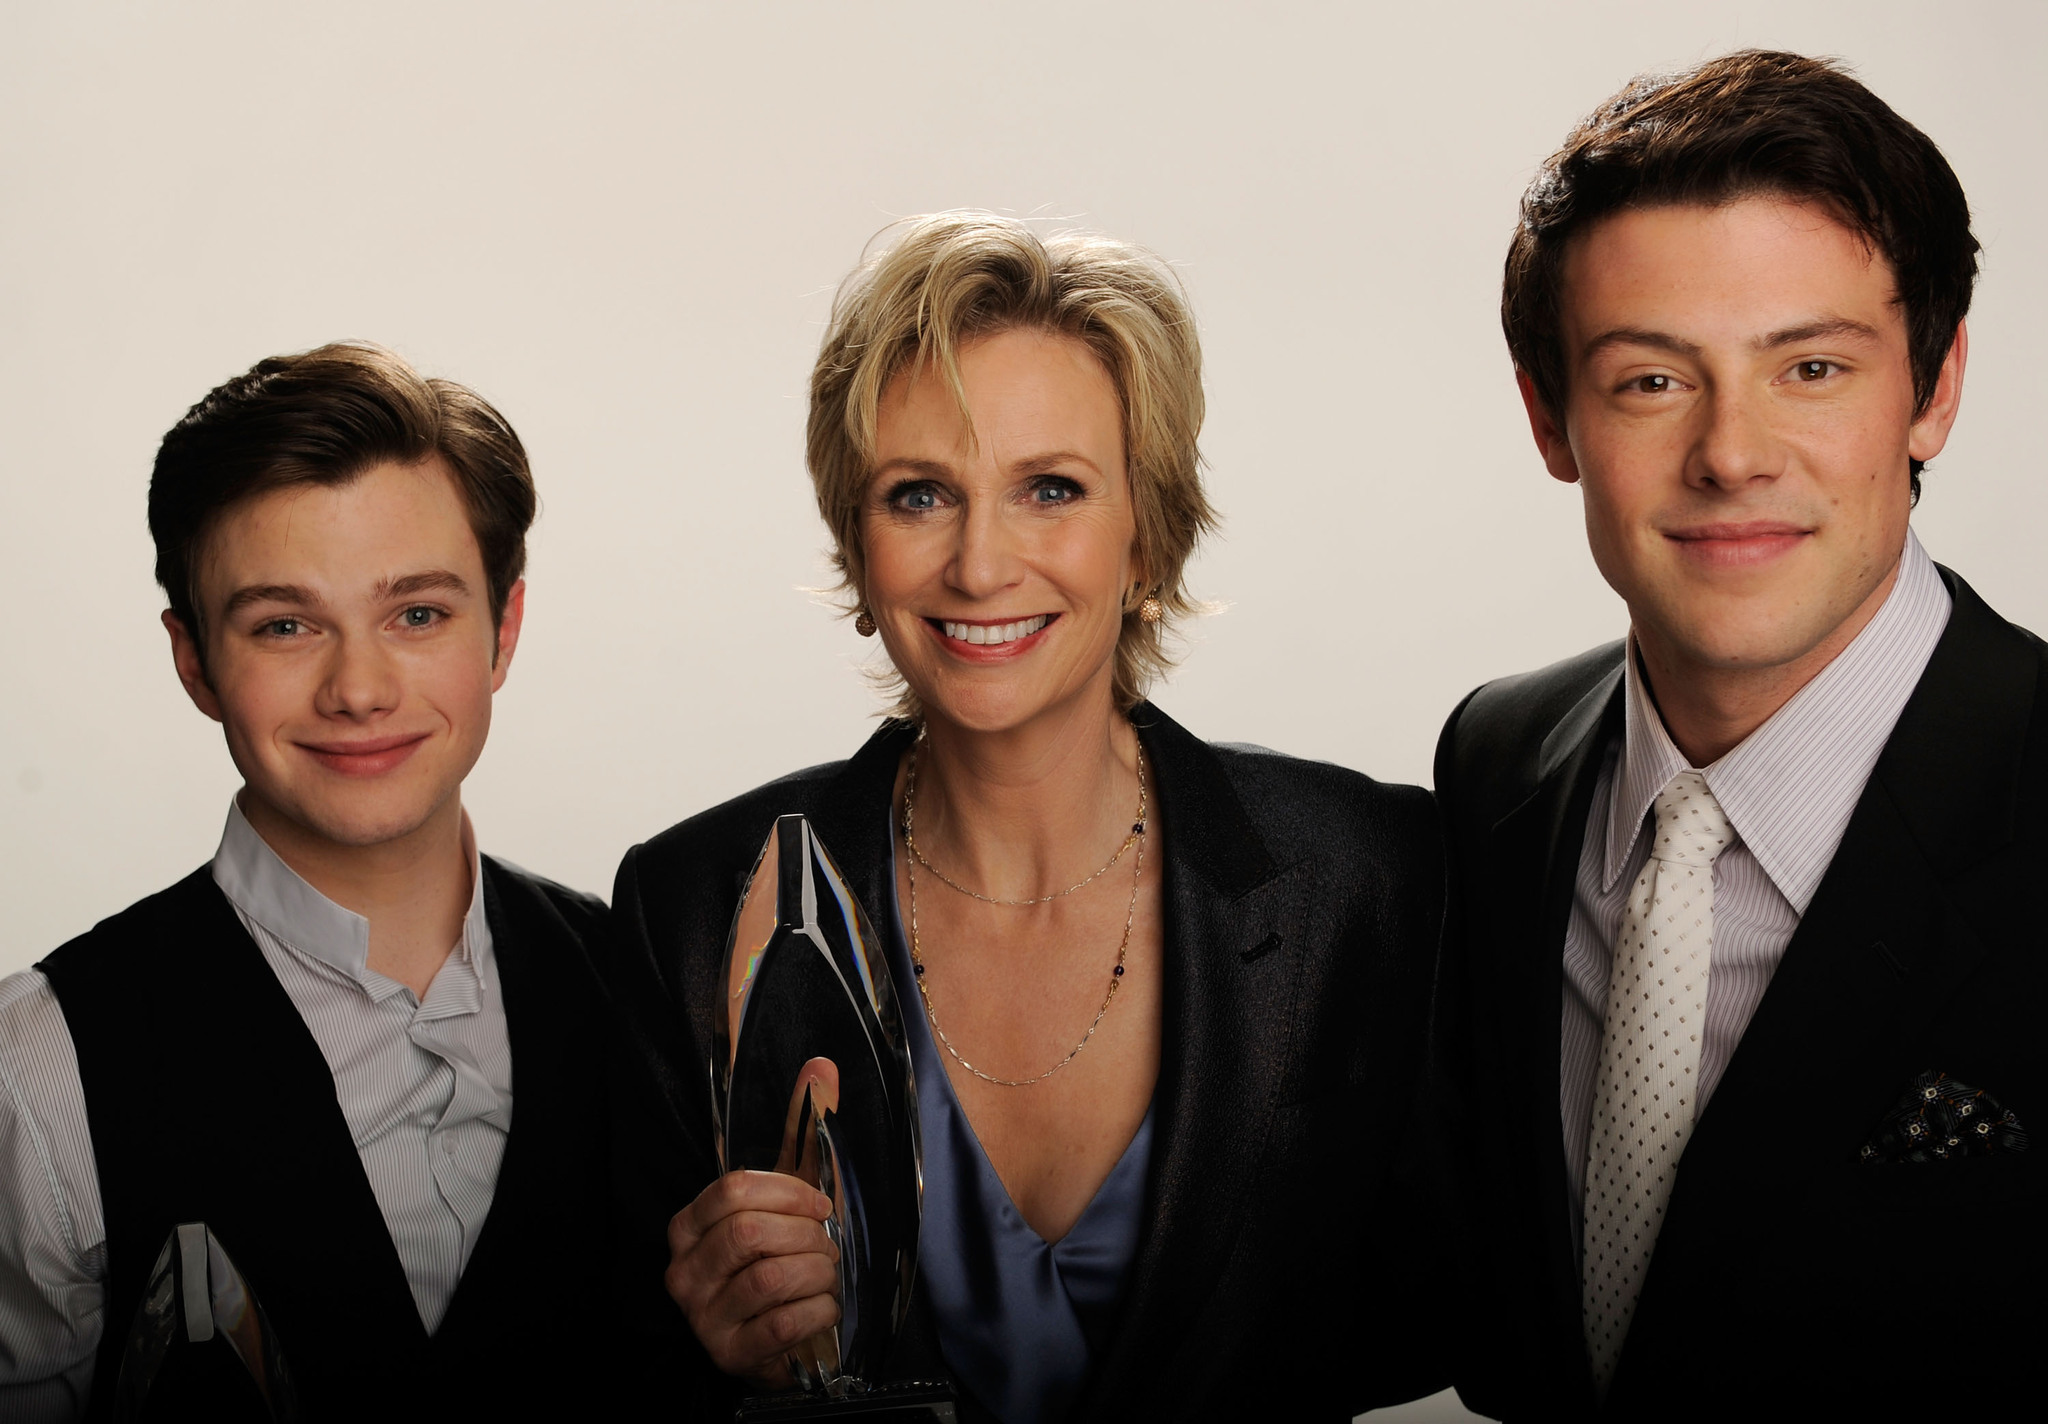 Jane Lynch, Cory Monteith and Chris Colfer